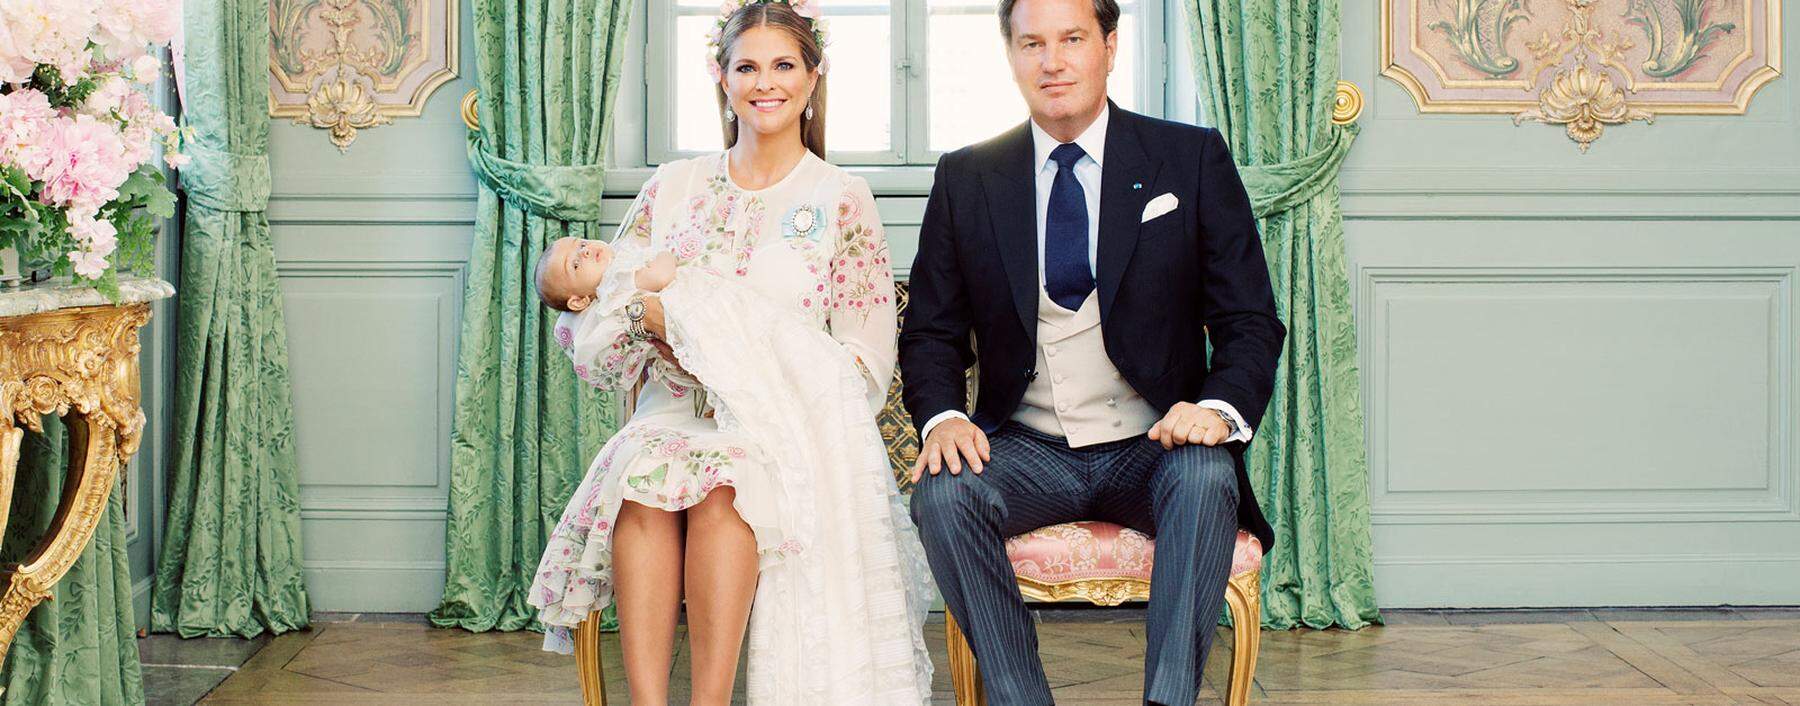 Princess Madeleine and officiant Archbishop Antje Jackelen are seen during princess Adrienne´s christening ceremony in Drottningholm Palace Chapel, Stockholm